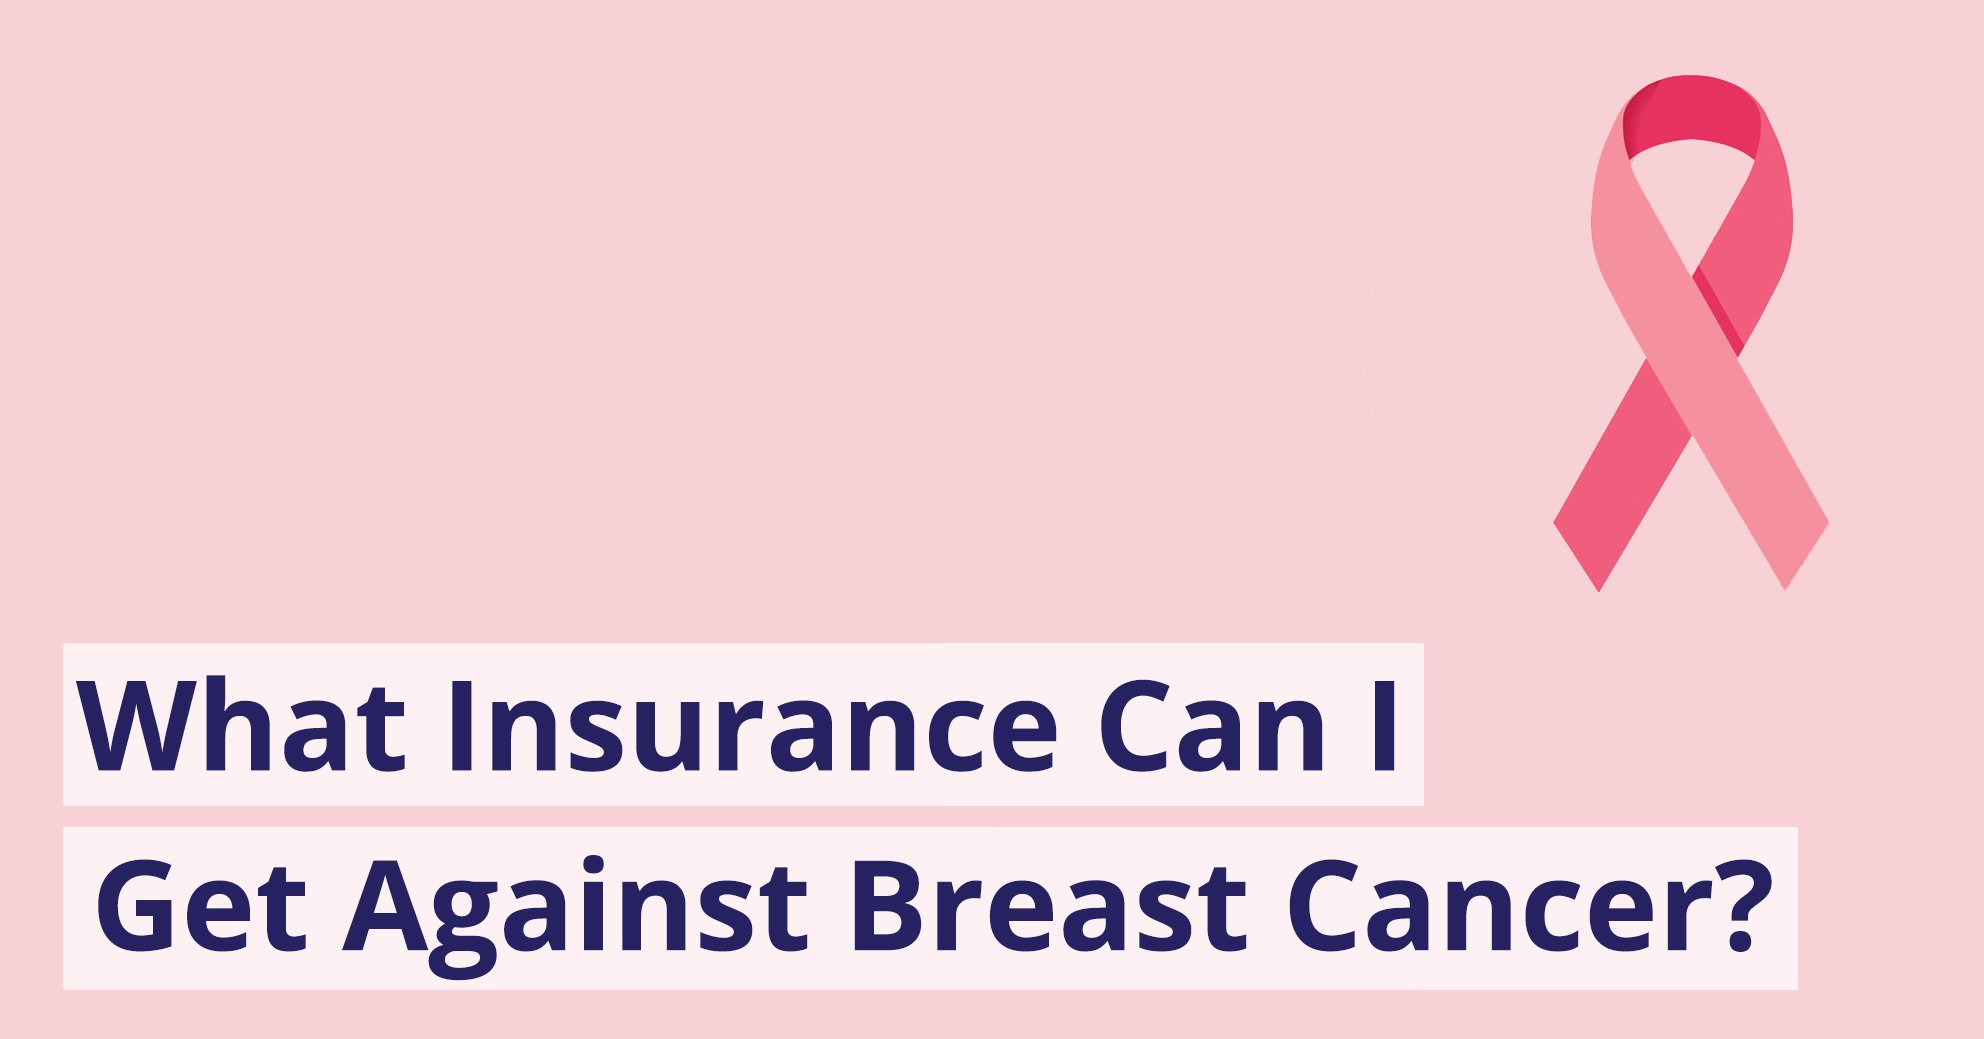 What insurance should I get vs. breast cancer?